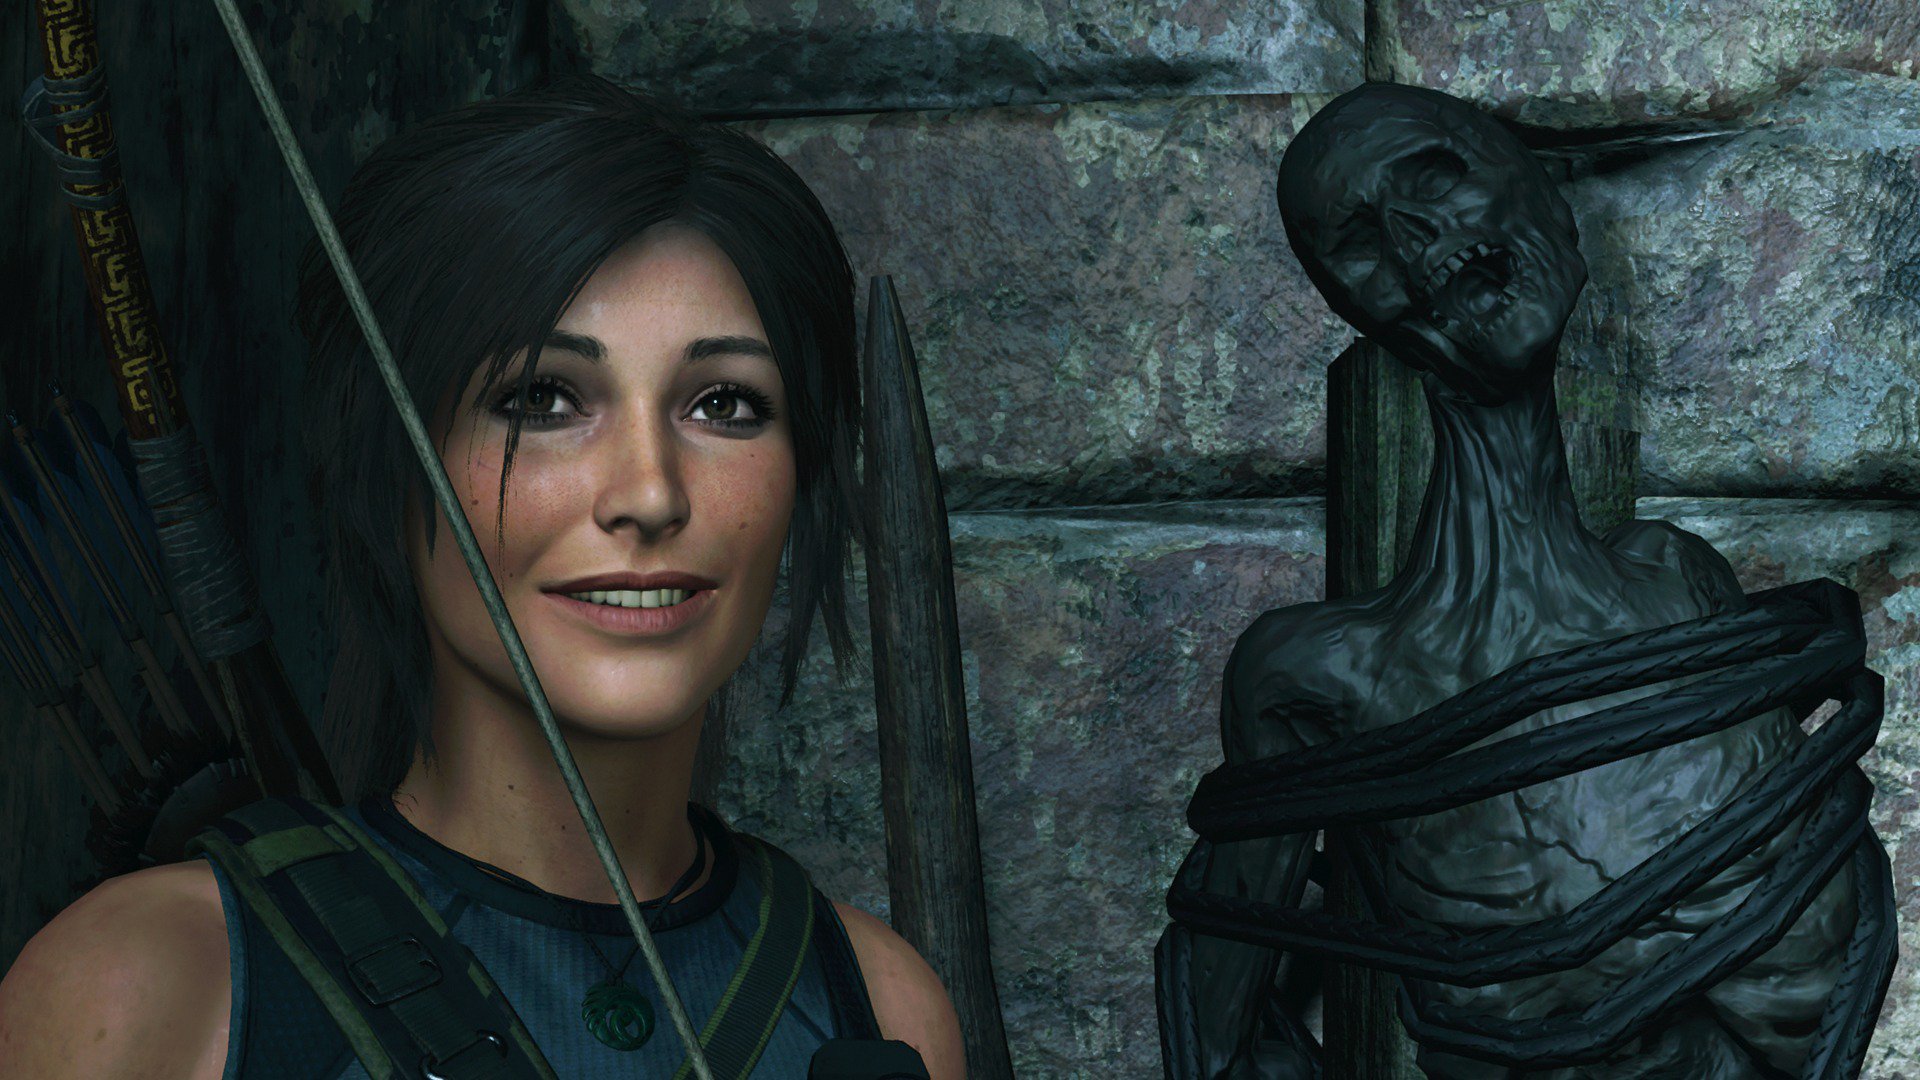 Crystal Dynamics now has "control" of Tomb Raider following Square Enix sale